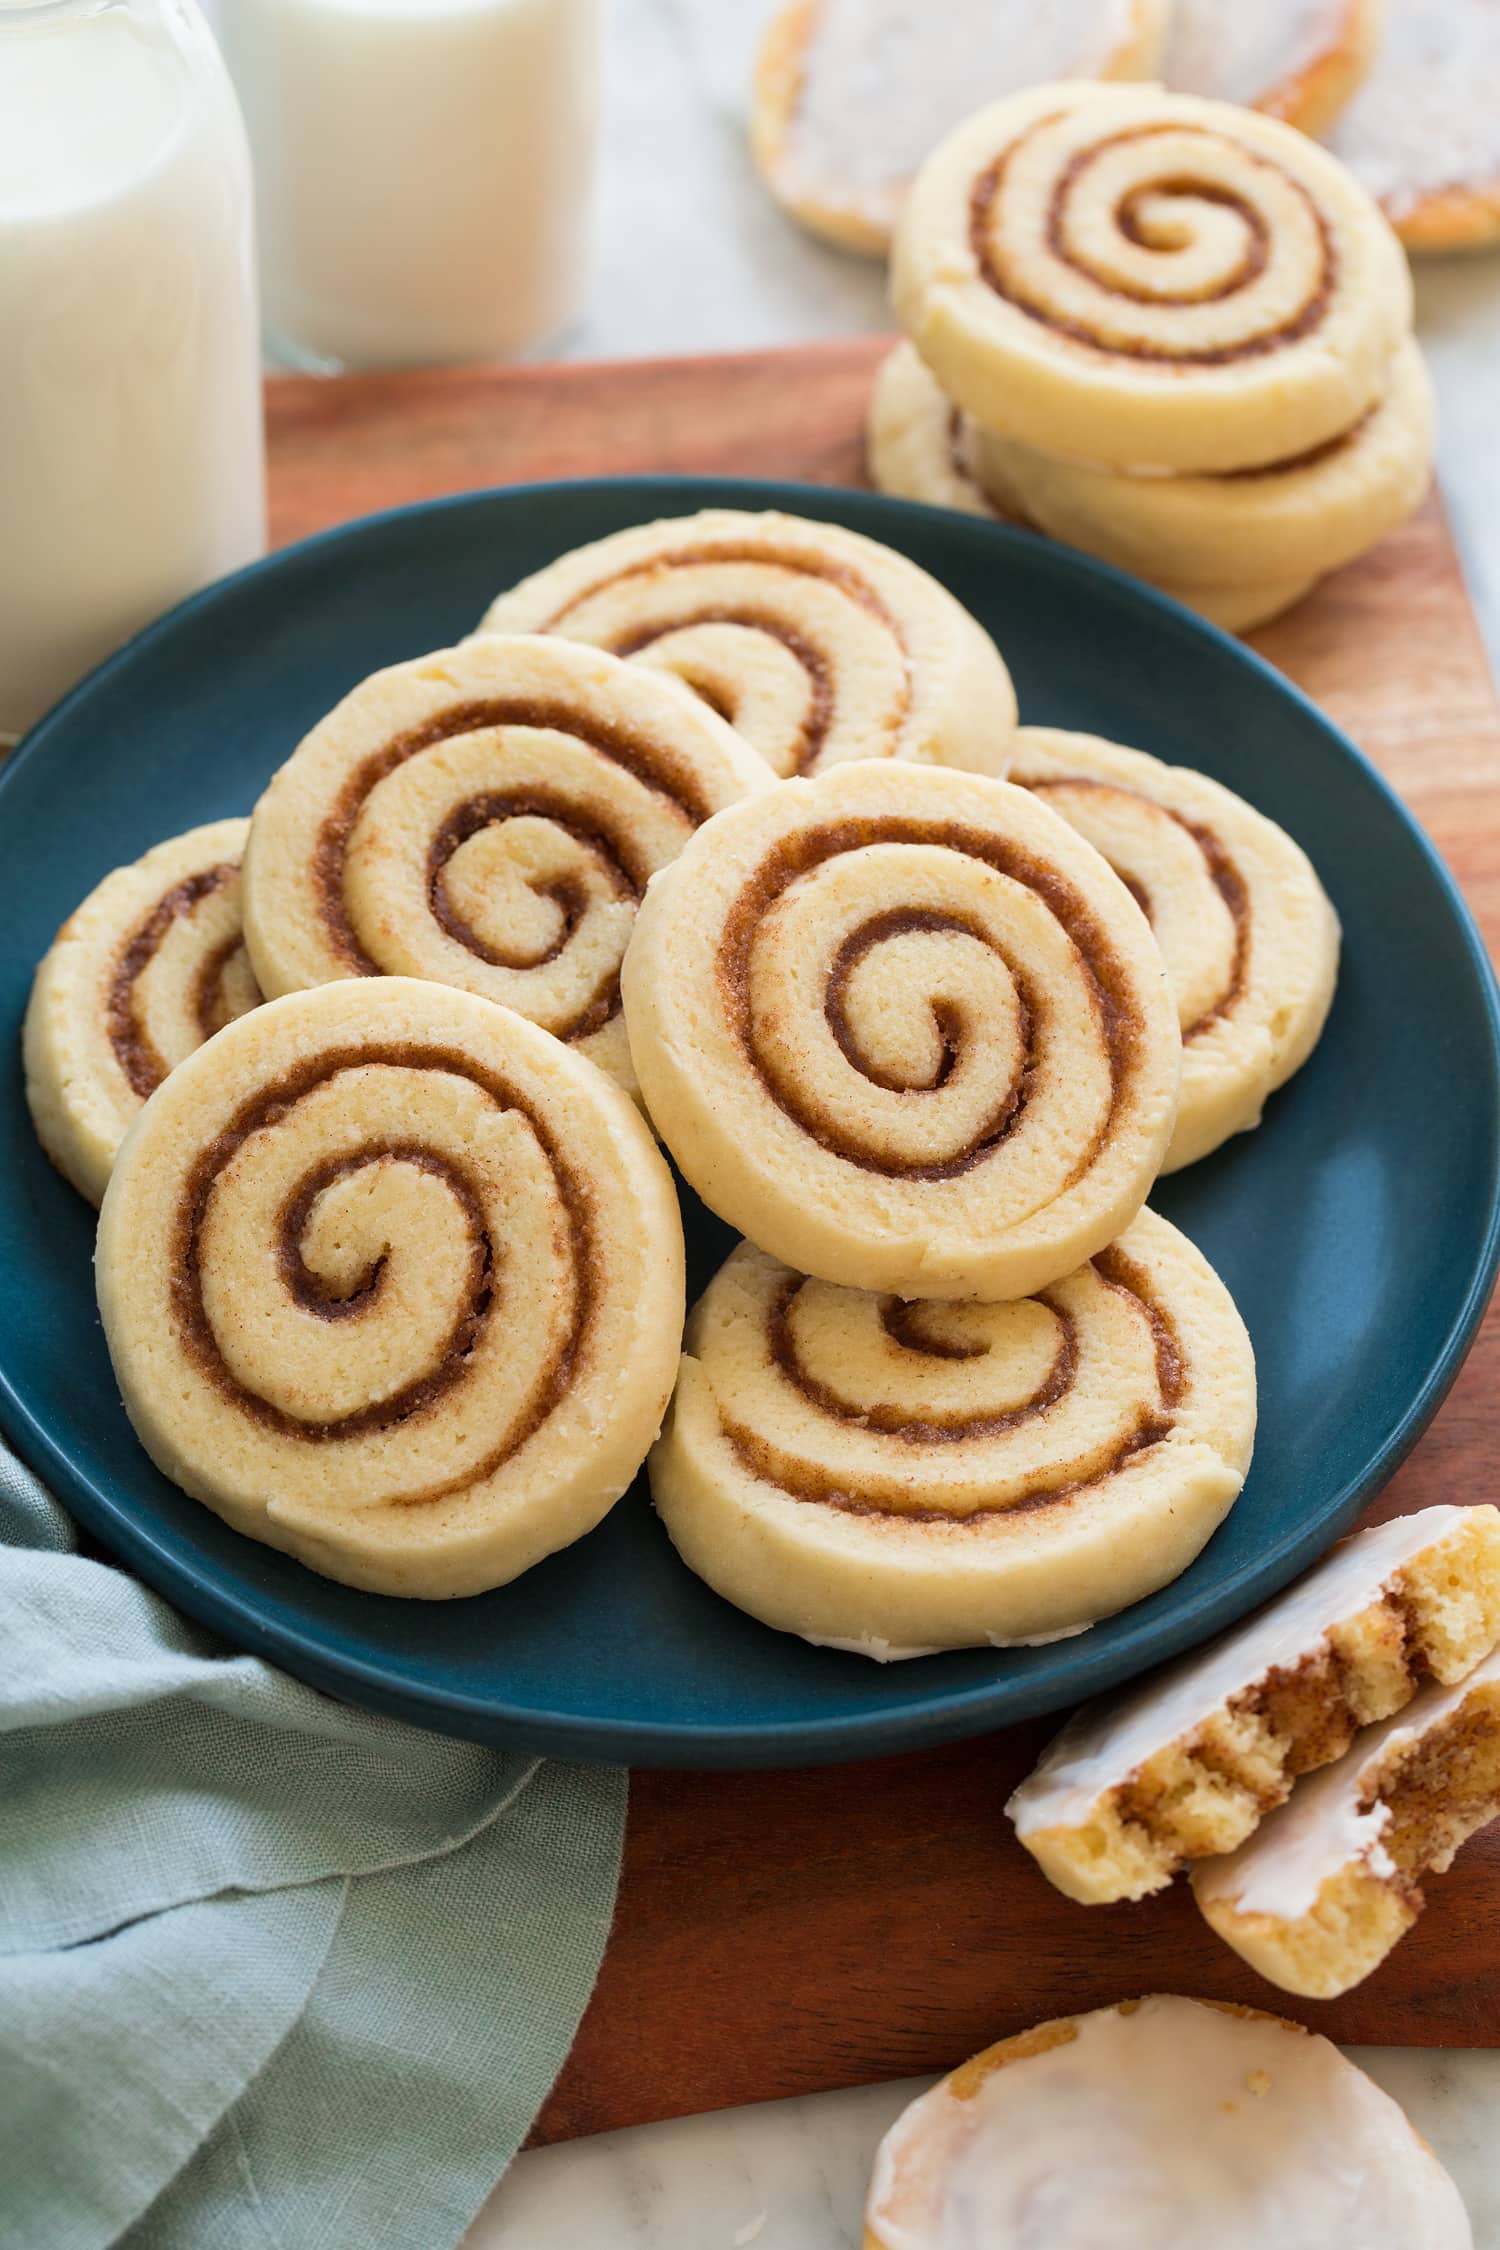 Cinnamon roll cookies piled on a blue plate on a wooden surface.